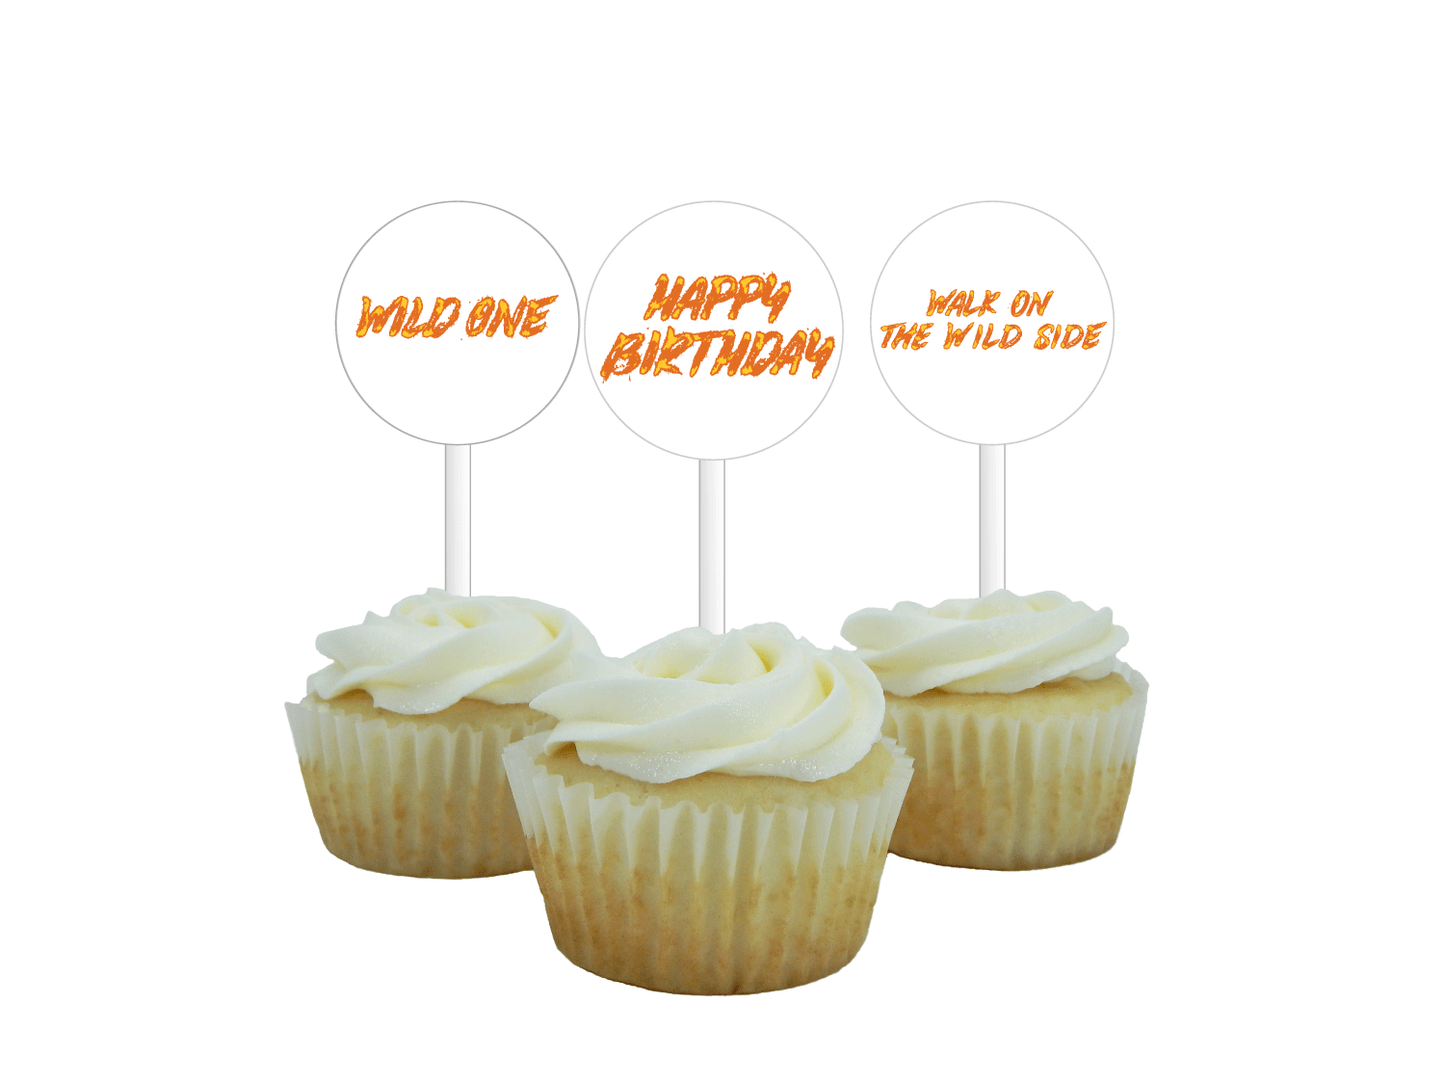 DIY wild one birthday party cupcake toppers - Celebrating Together